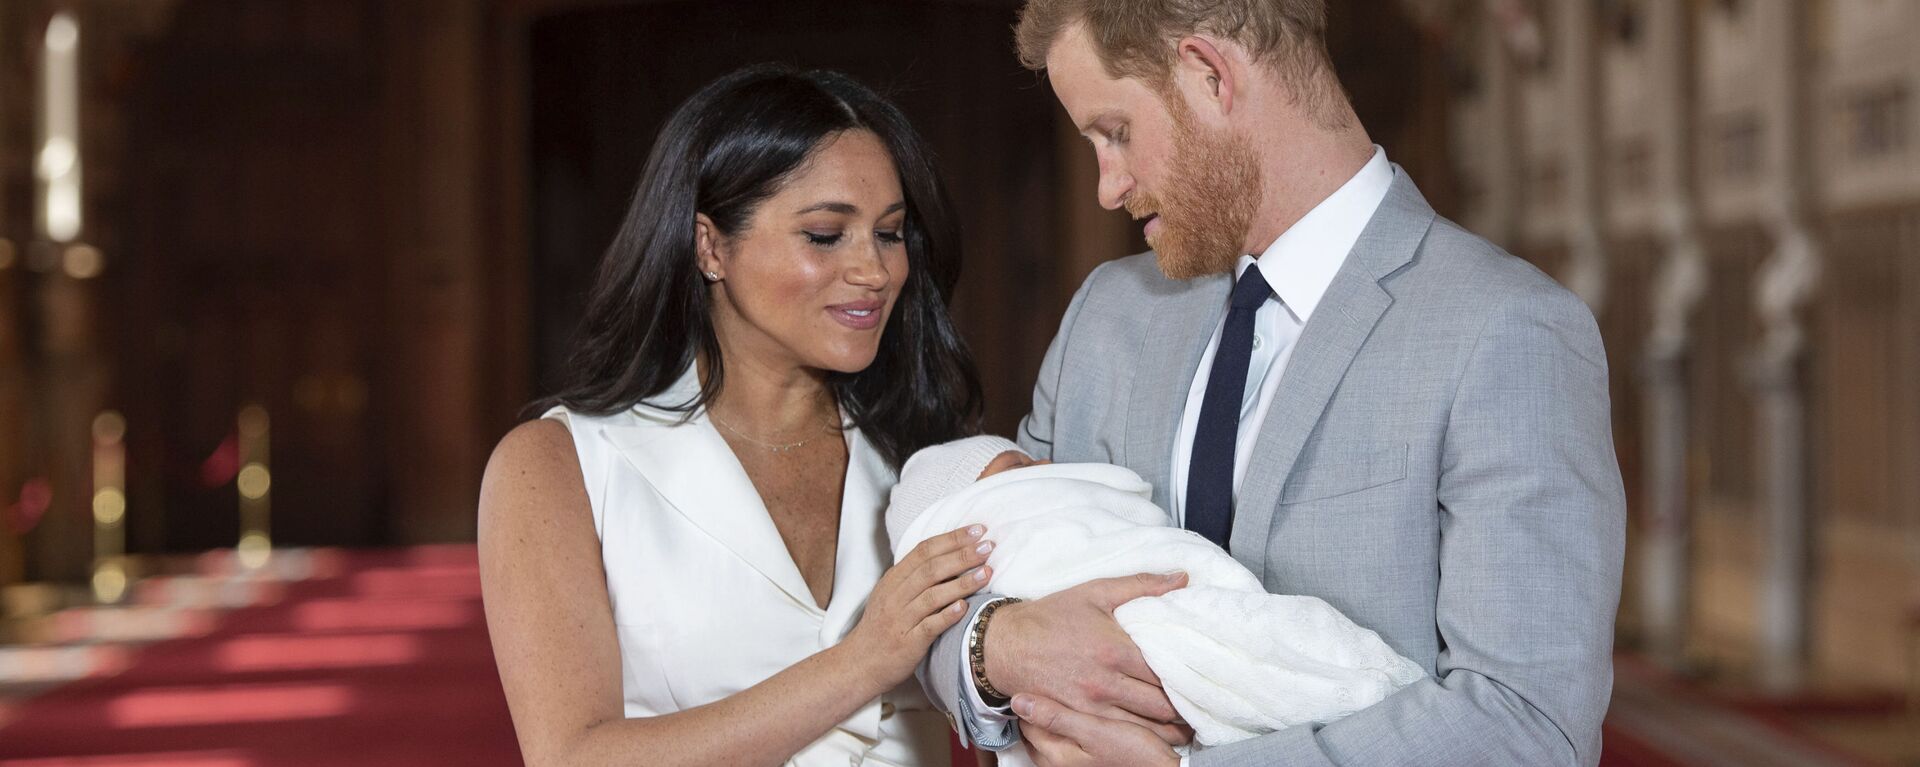 In this Wednesday May 8, 2019 file photo Britain's Prince Harry and Meghan, Duchess of Sussex, pose during a photocall with their newborn son Archie, in St George's Hall at Windsor Castle, Windsor, south England. The Duchess of Sussex has revealed that she had a miscarriage in July. Meghan described the experience in an opinion piece in the New York Times on Wednesday. She wrote: I knew, as I clutched my firstborn child, that I was losing my second. The former Meghan Markle and husband Prince Harry have a son, Archie, born in 2019.  - Sputnik International, 1920, 30.08.2022